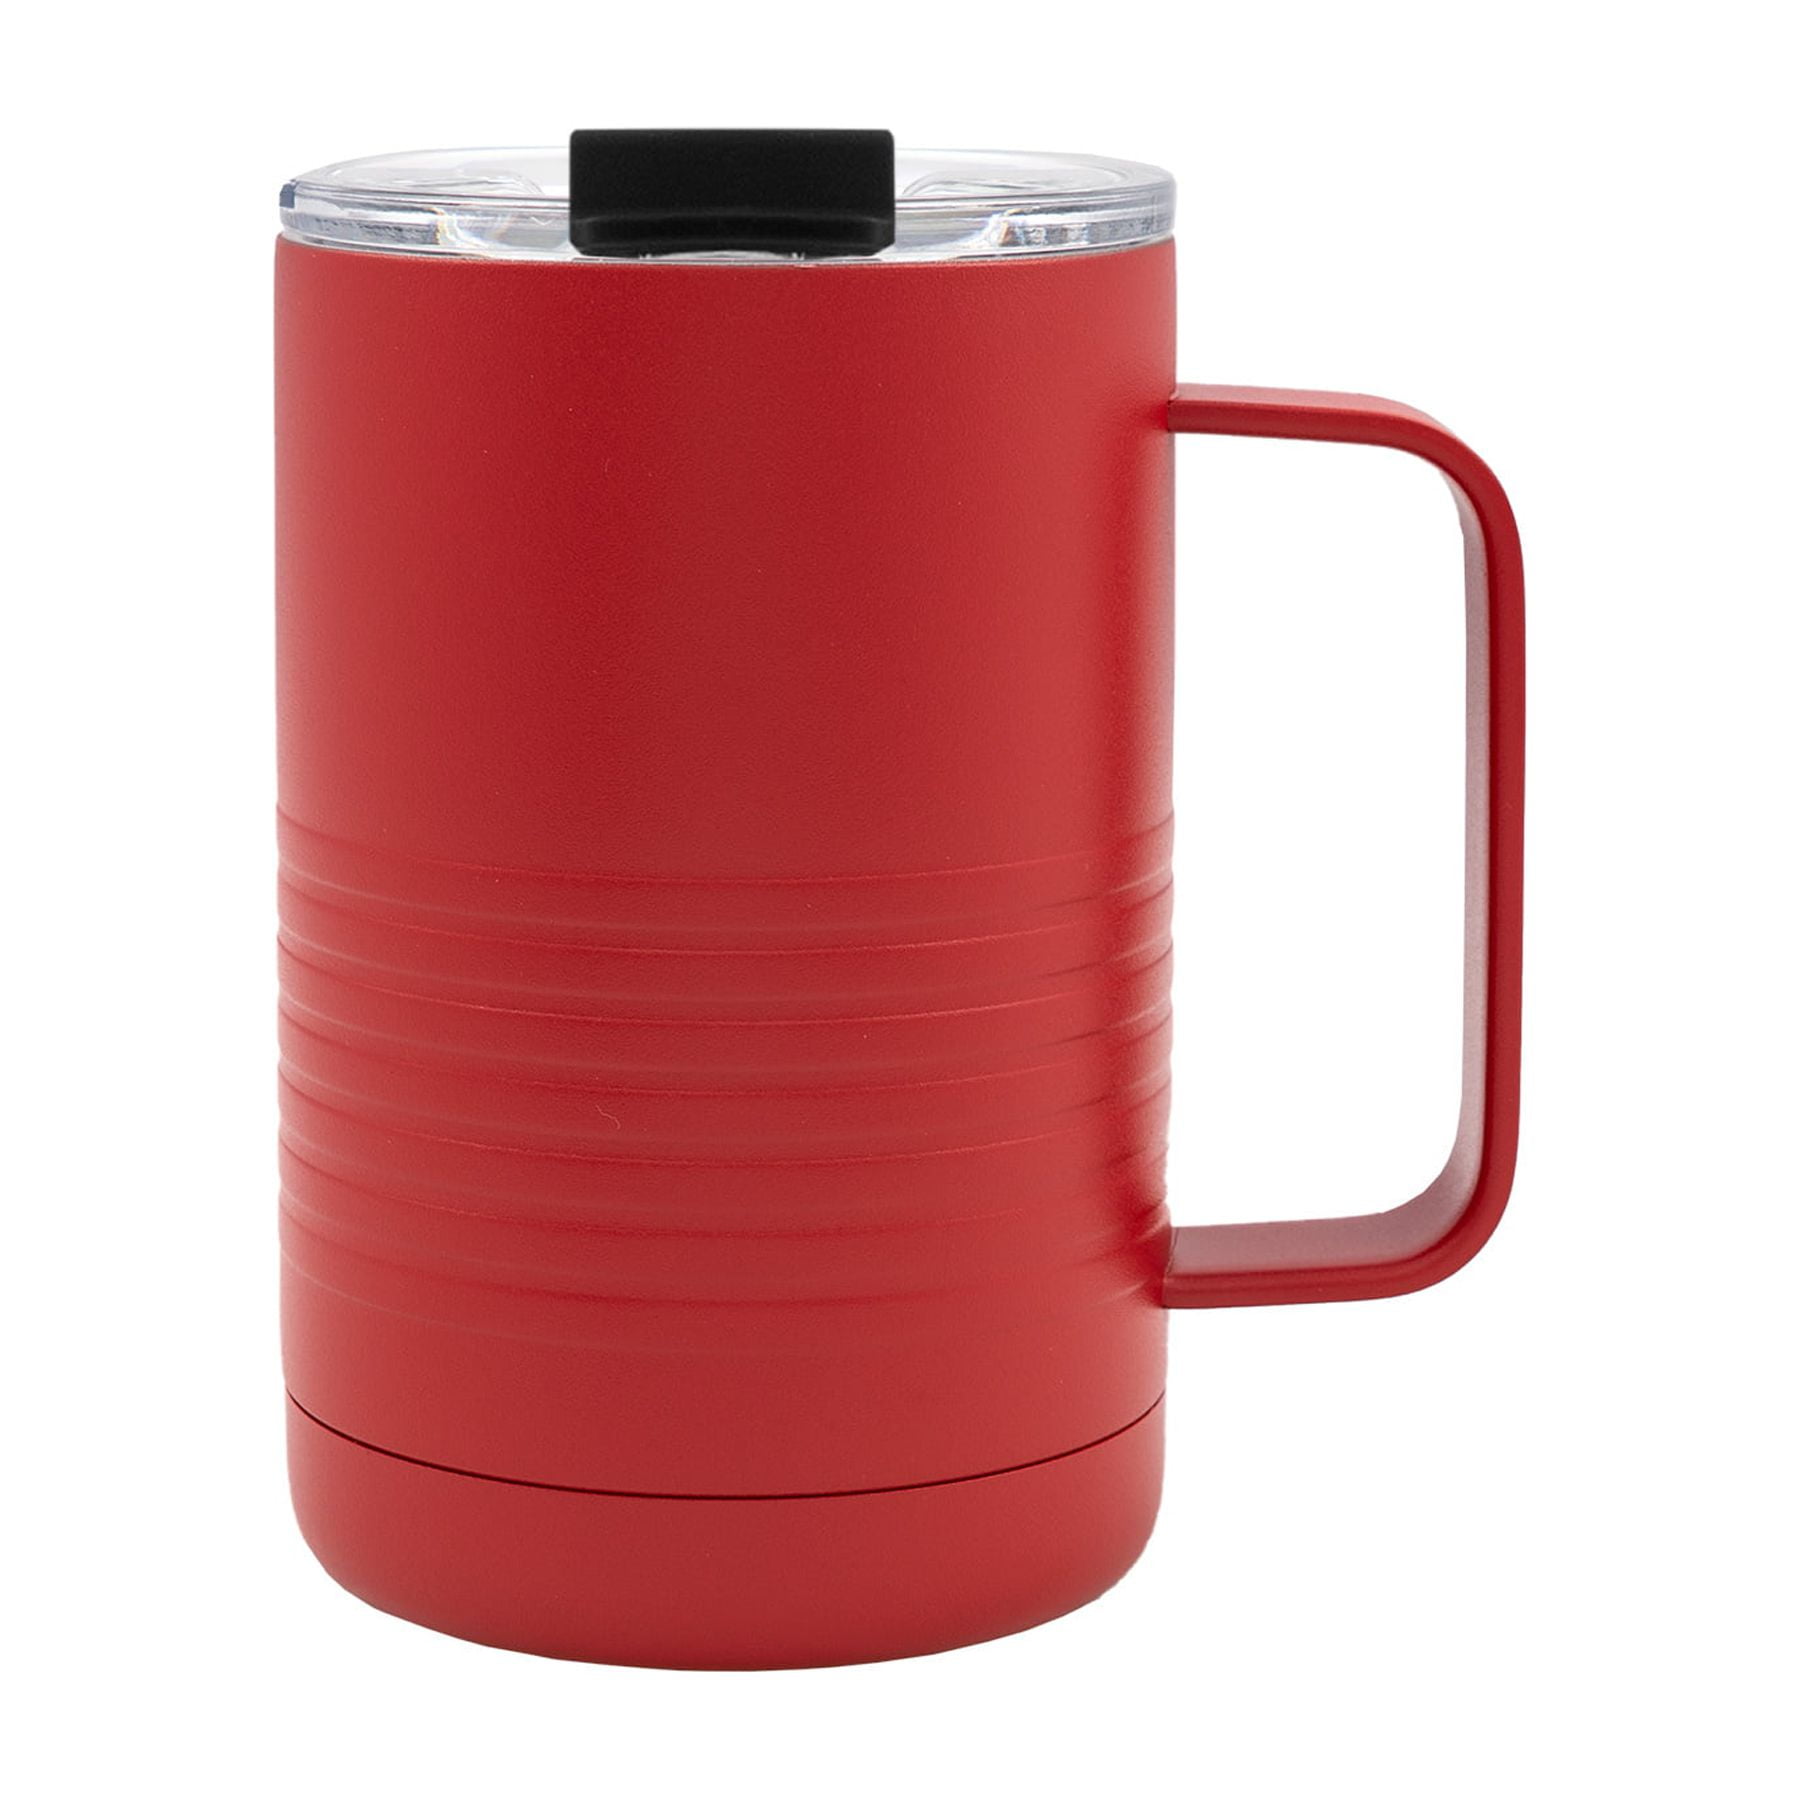 Patriot Coolers 20oz Stainless Steel Tumbler, Red